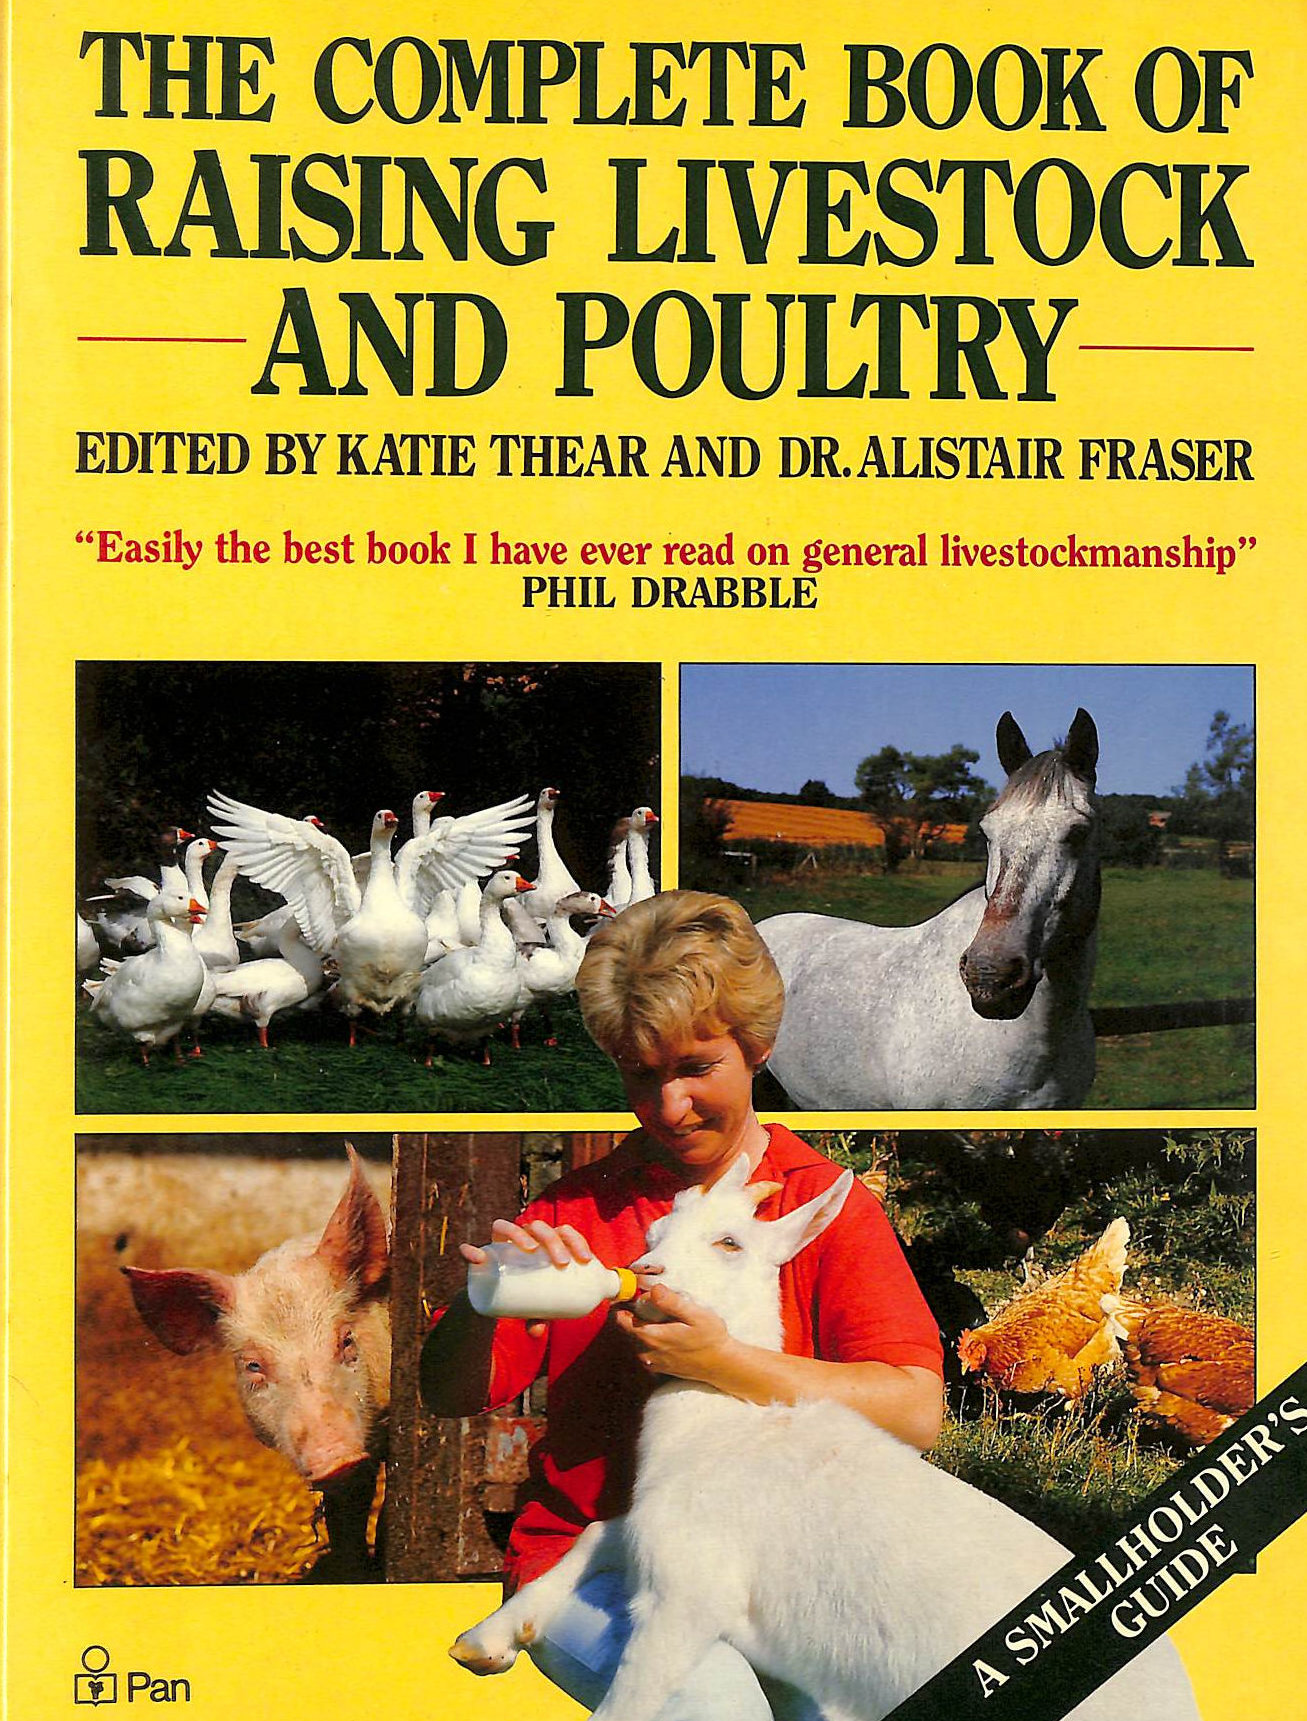 THEAR, KATIE - Complete Book of Raising Livestock and Poultry